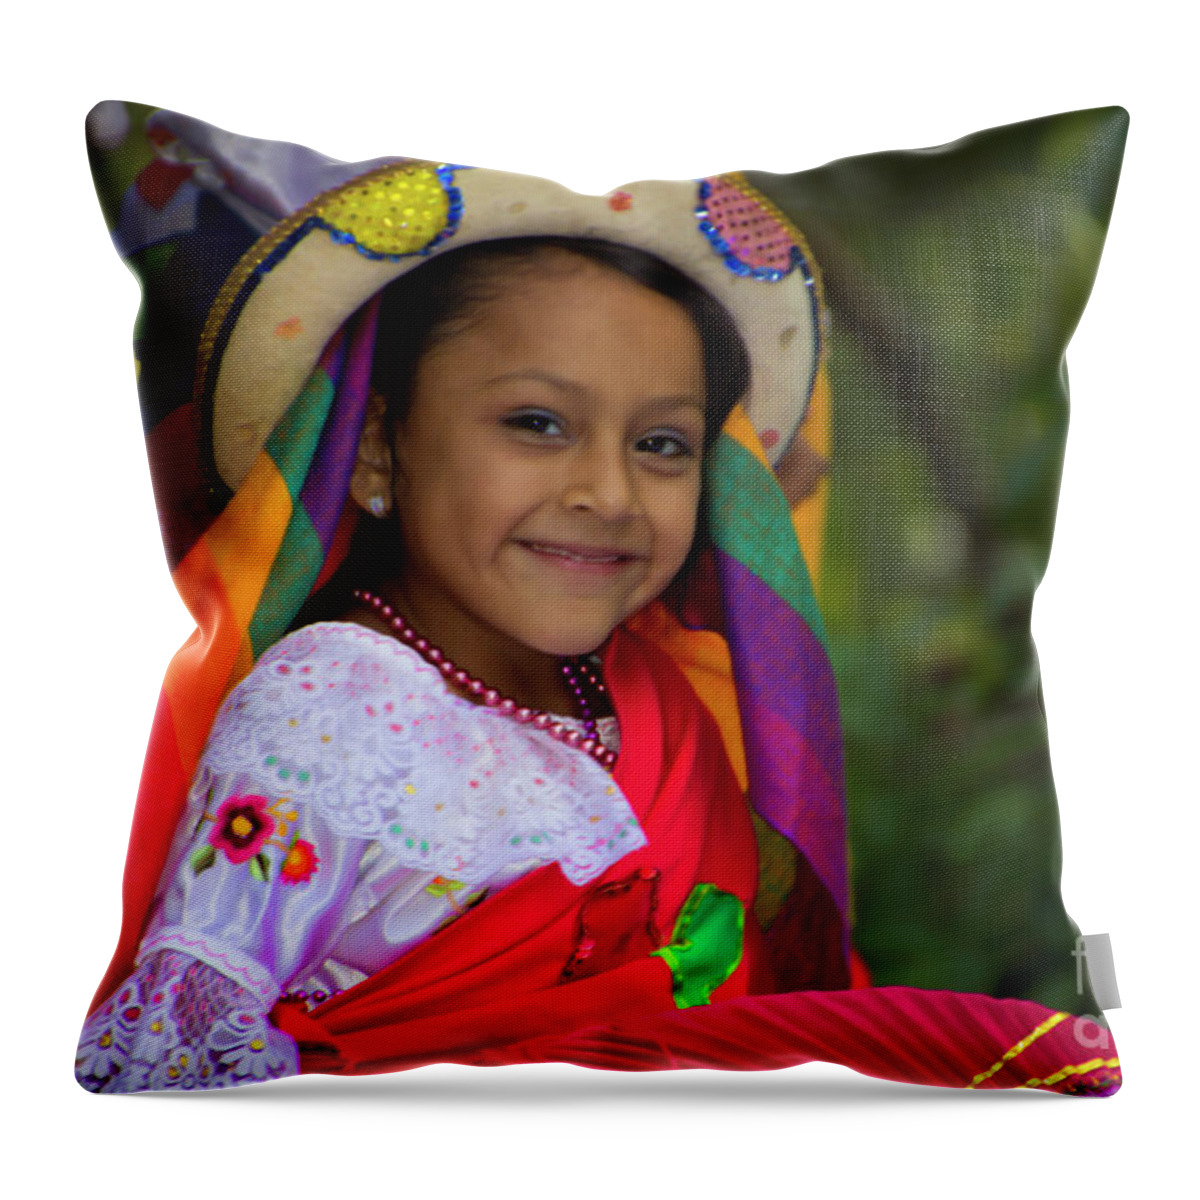 Girl Throw Pillow featuring the photograph Cuenca Kids 865 by Al Bourassa